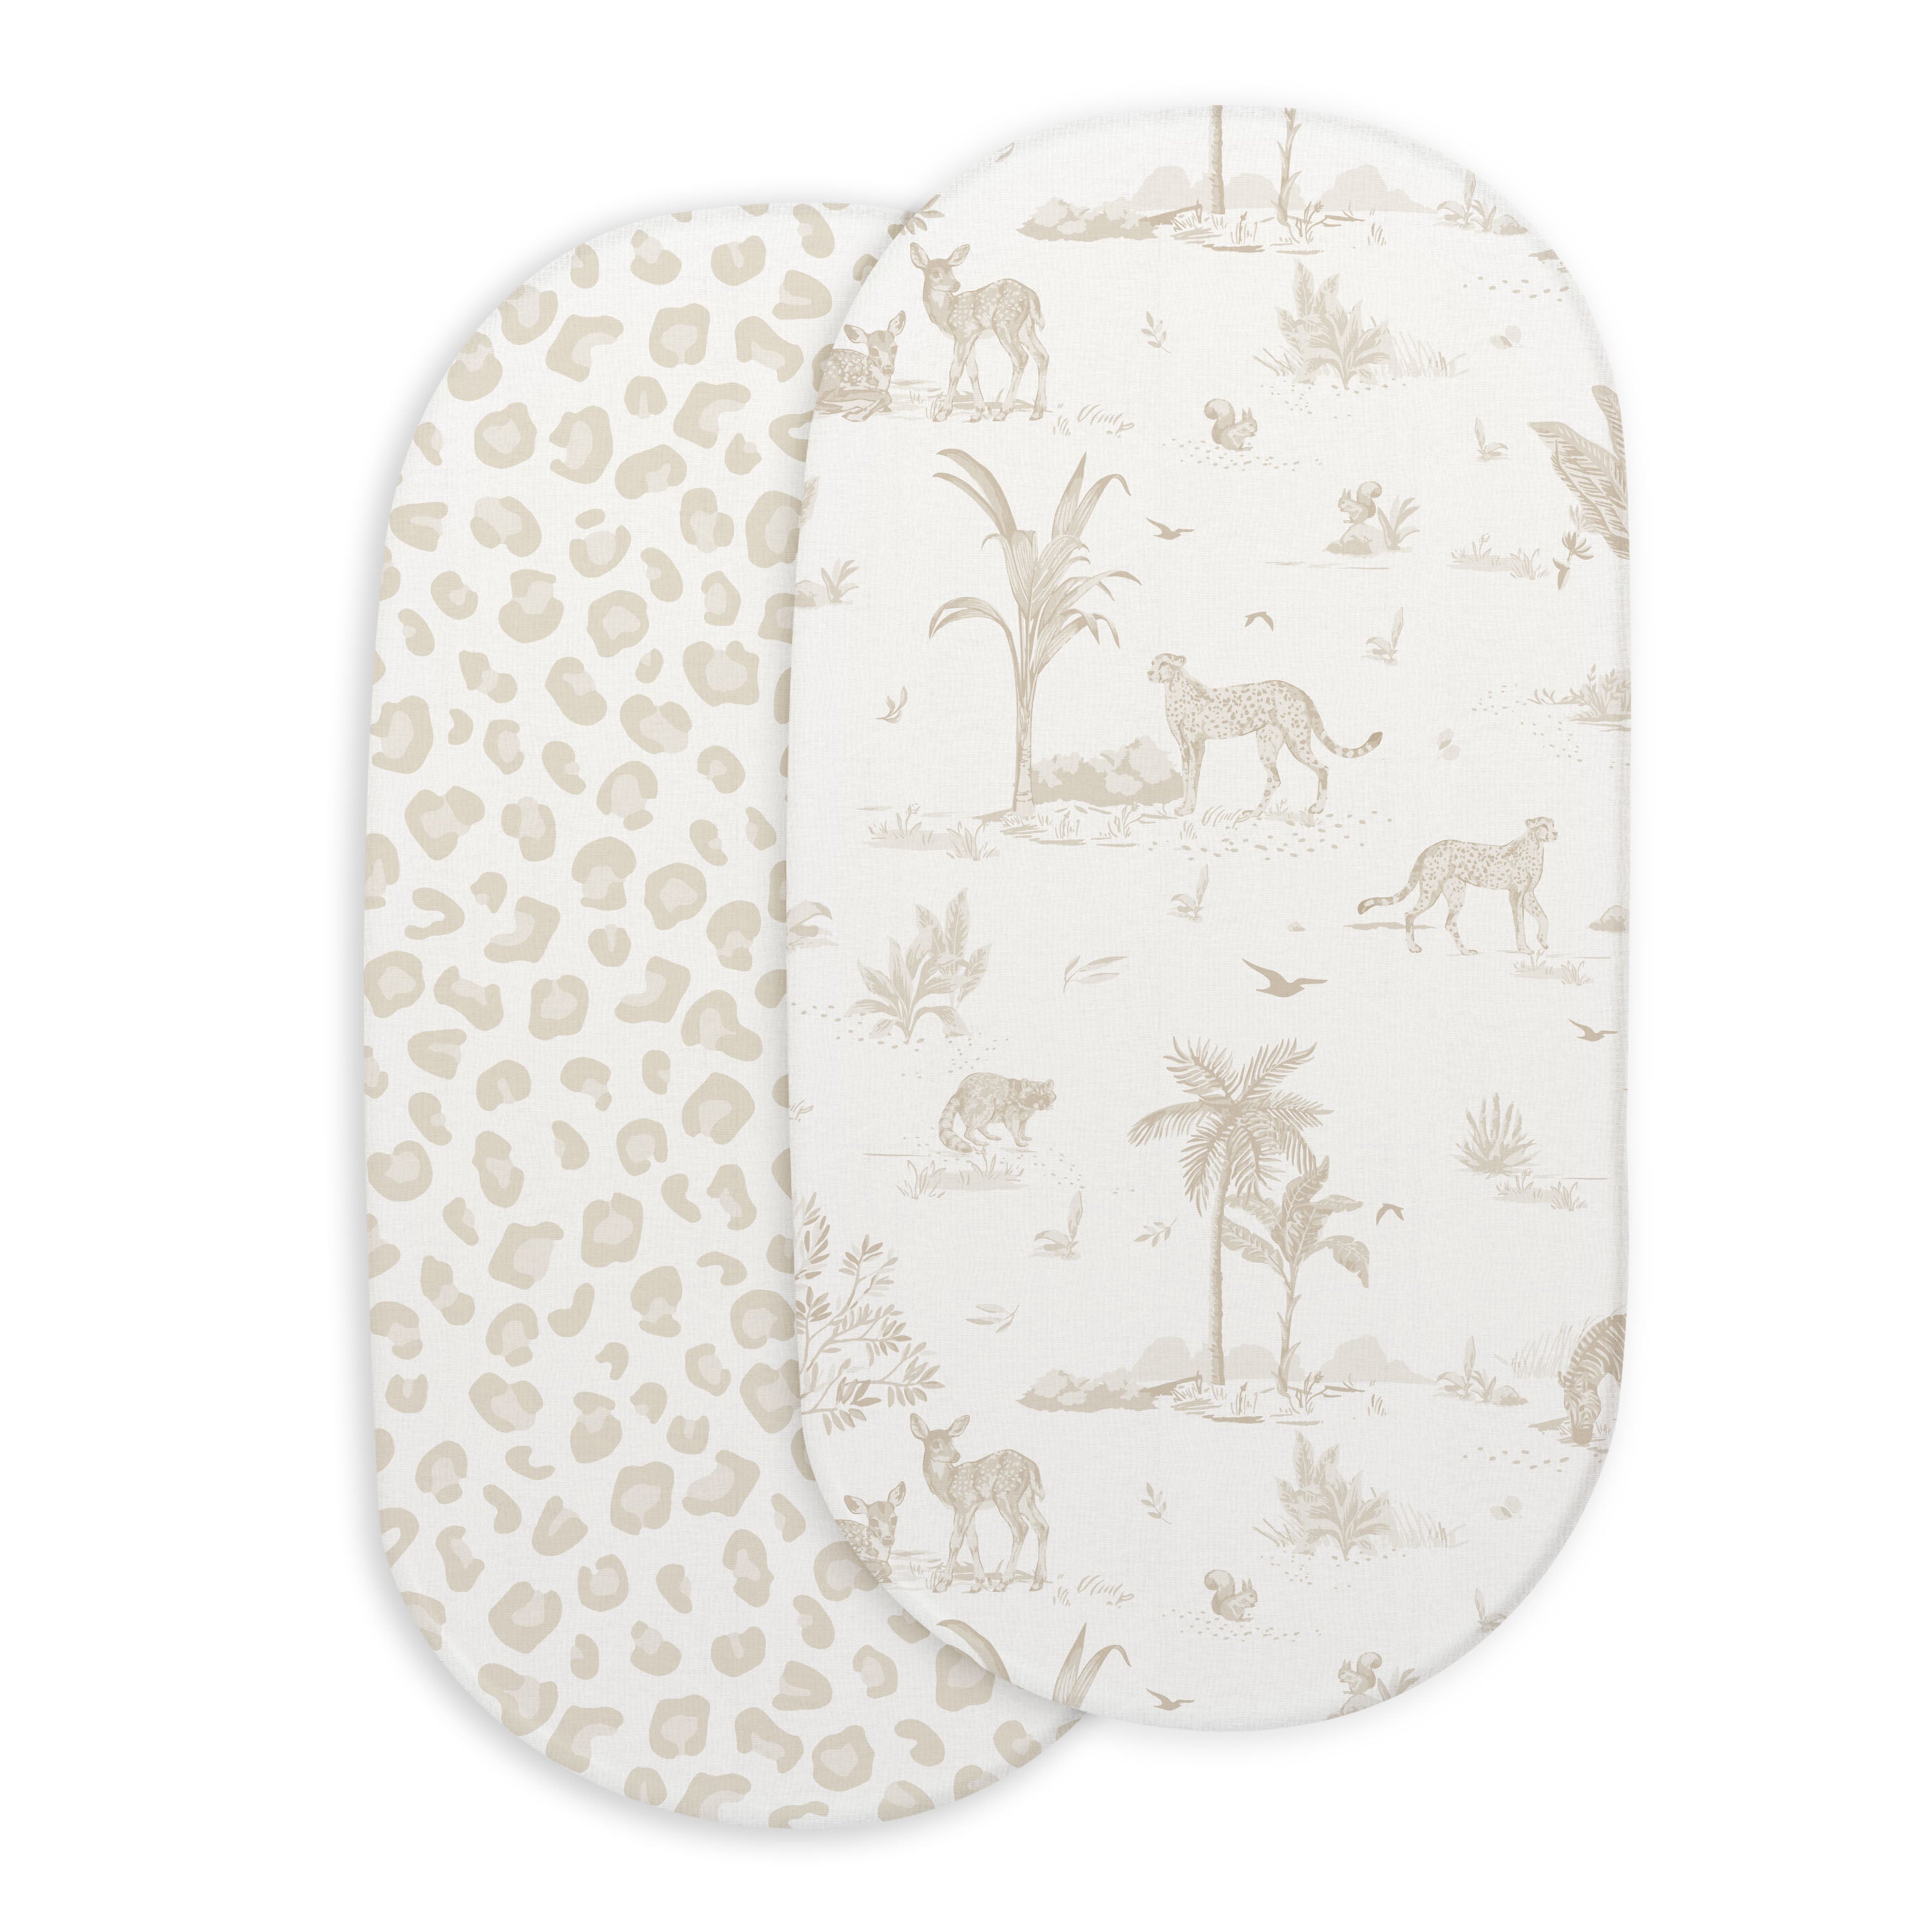 Two oval-shaped Makemake Organics bassinet mattresses with Safari & Wild fitted sheets; one features an animal print with leopards and trees, the other has a simplistic beige and white leopard spot pattern.